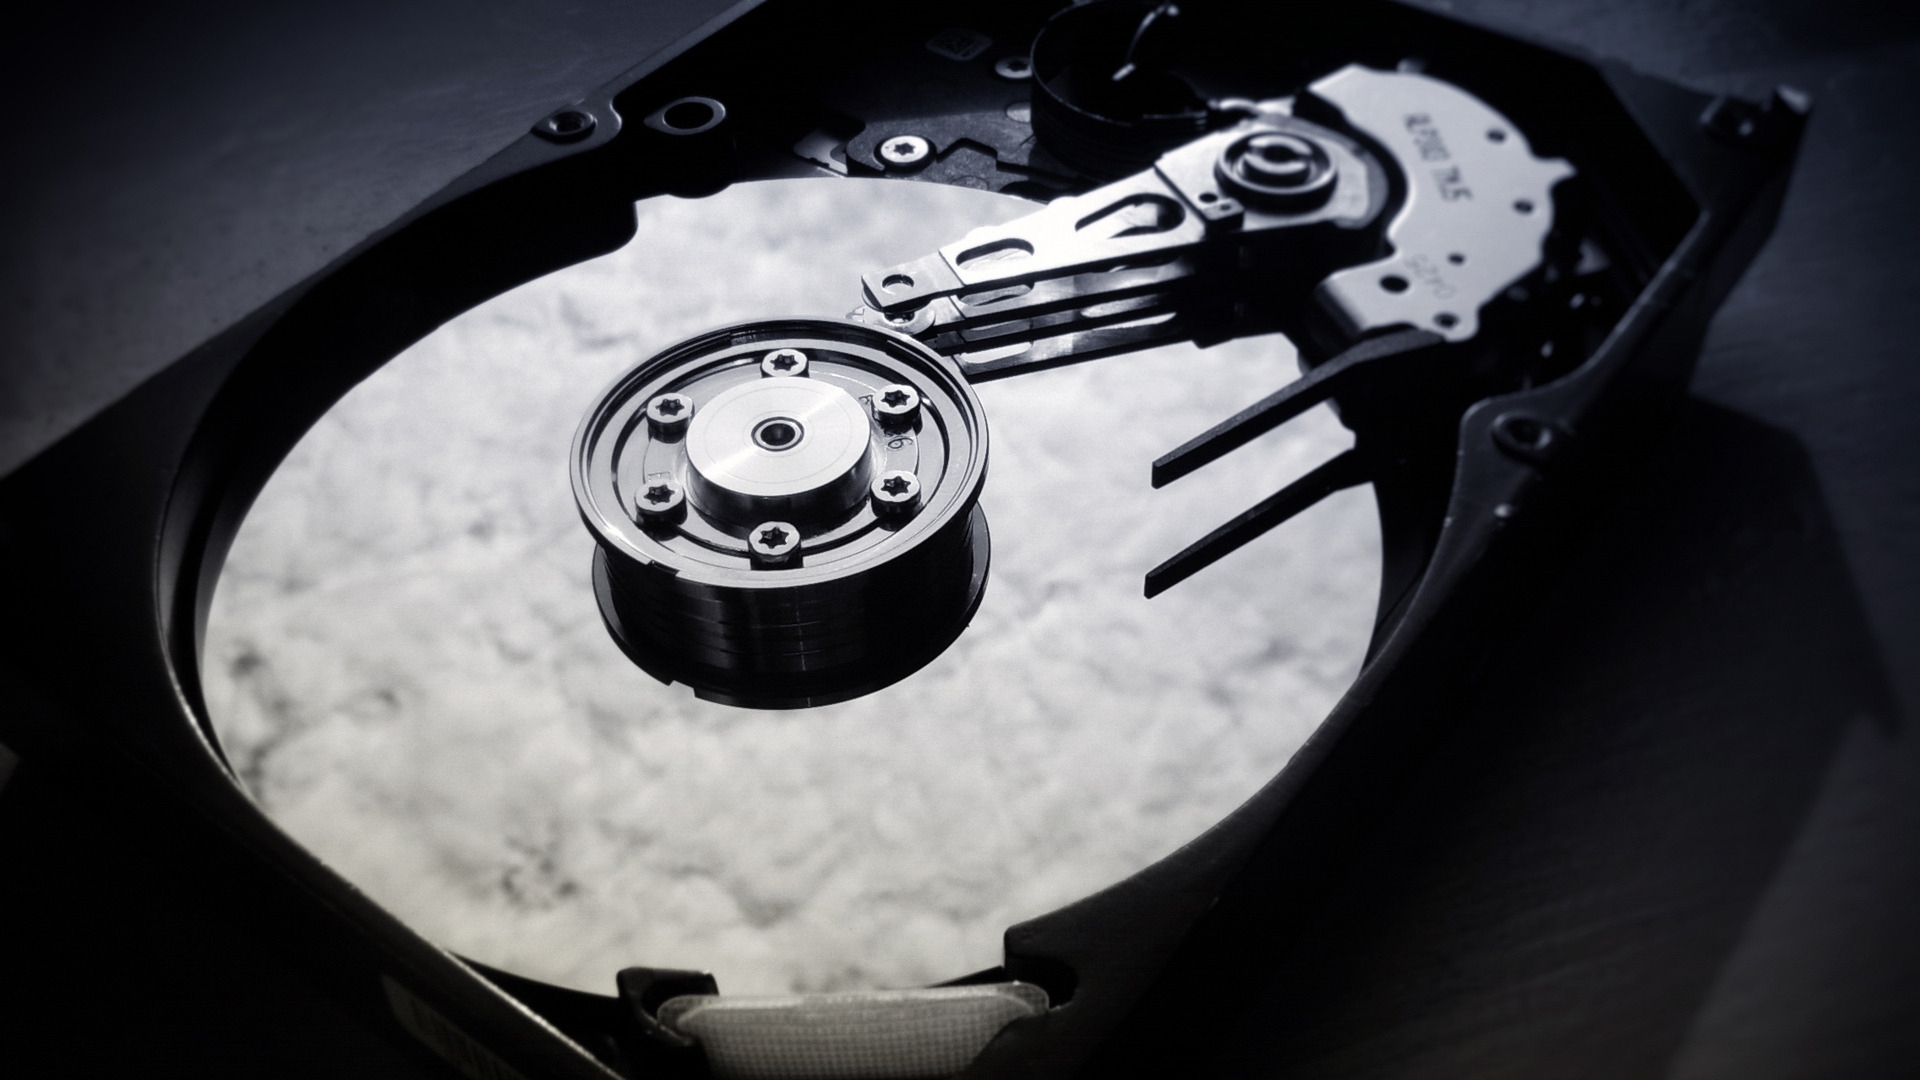 Hard Disk Drive for 1920 x 1080 HDTV 1080p resolution